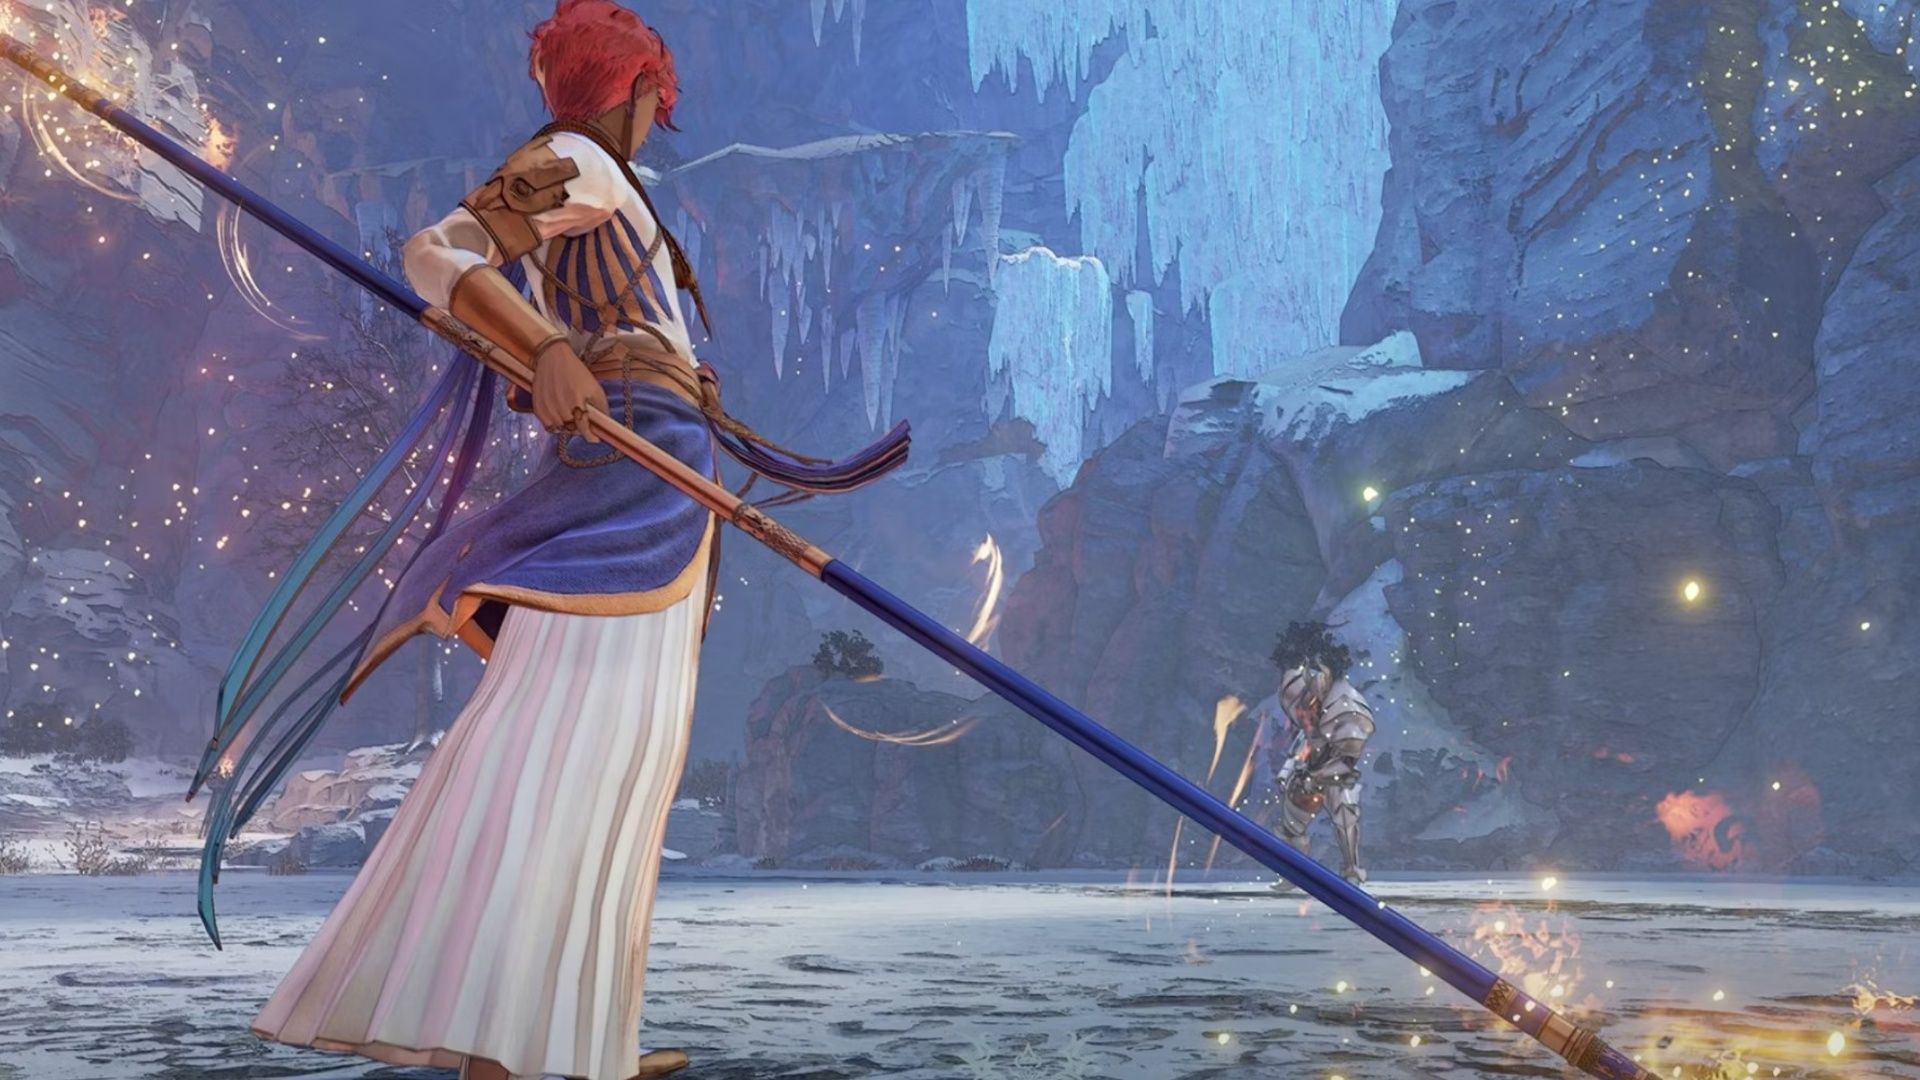 Dohalim squaring off against a formidable foe in Tales of Arise